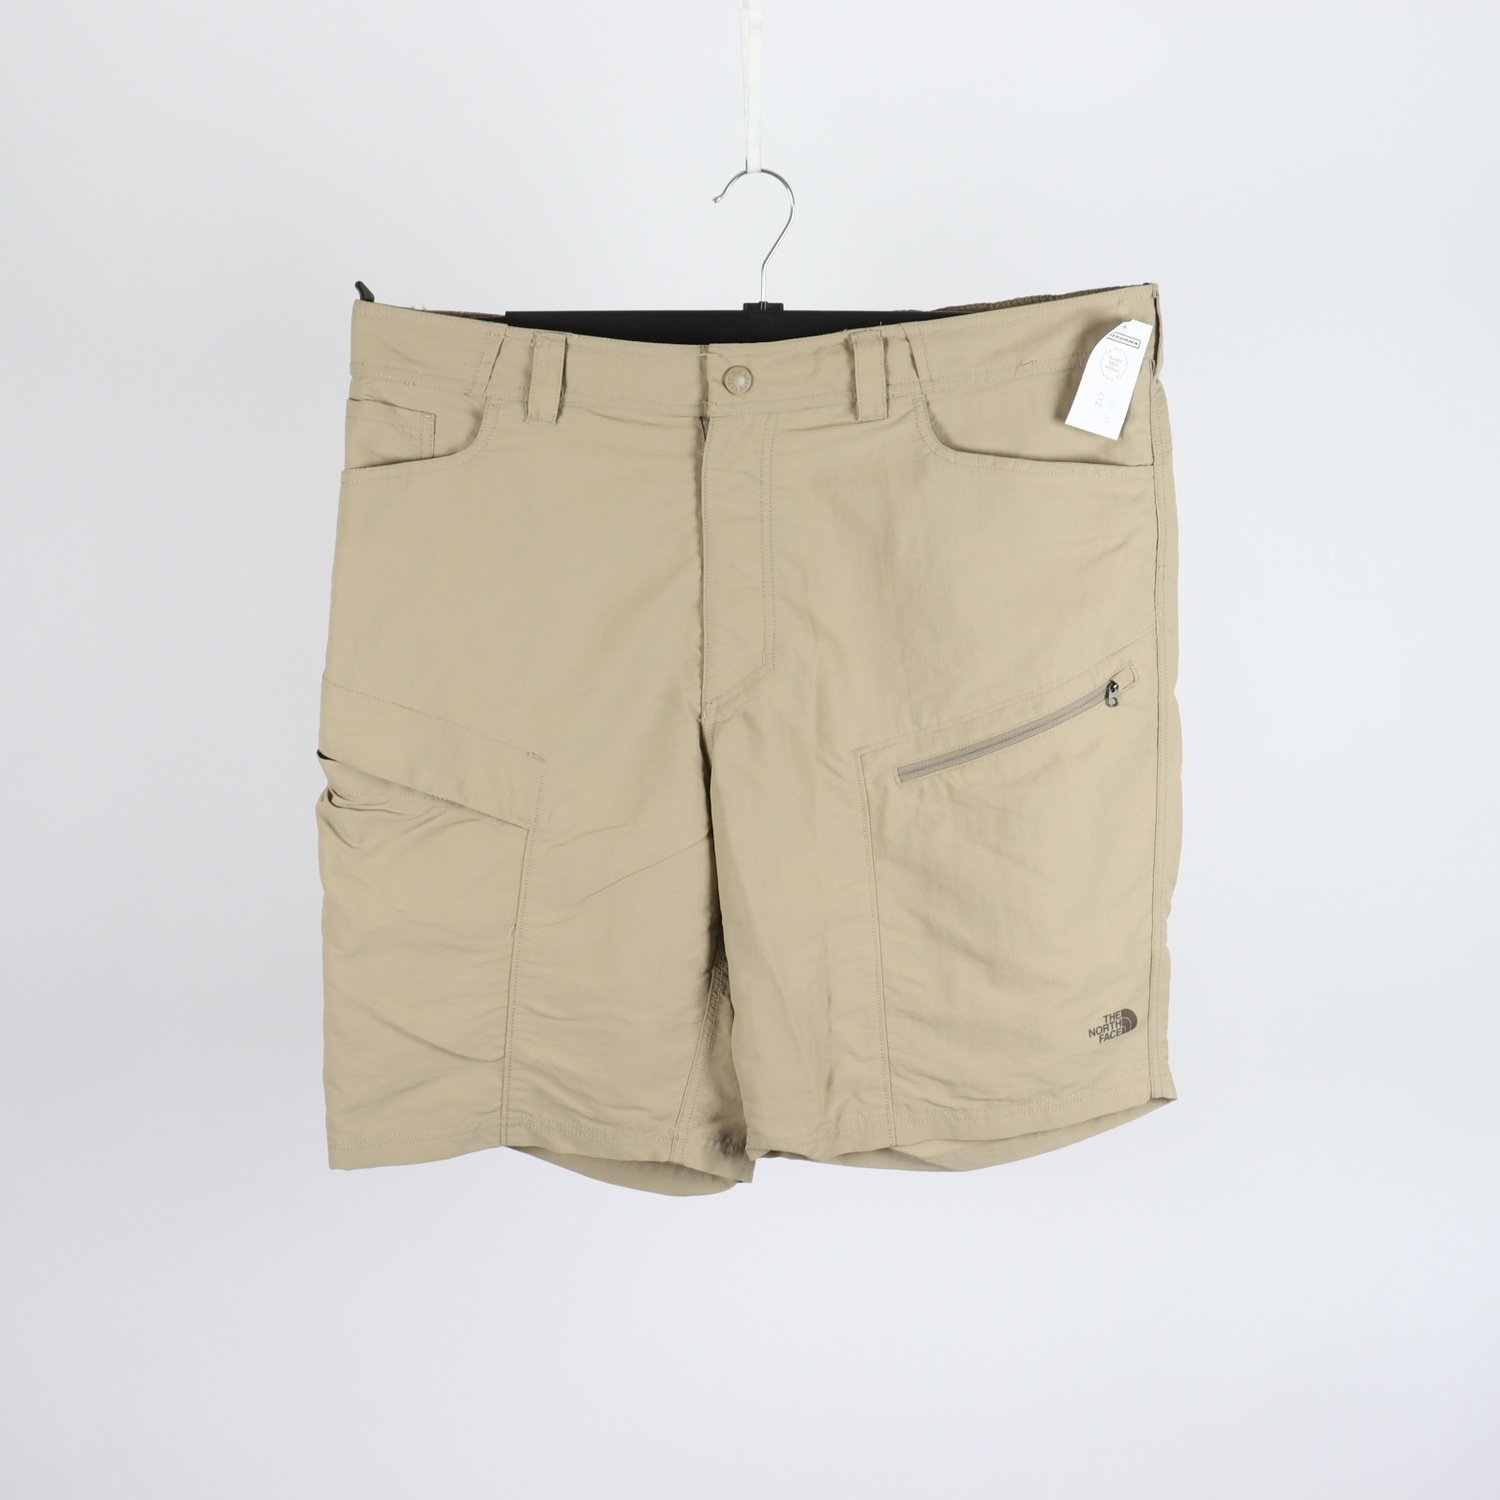 Shorts, The North Face, beige, stl. XL